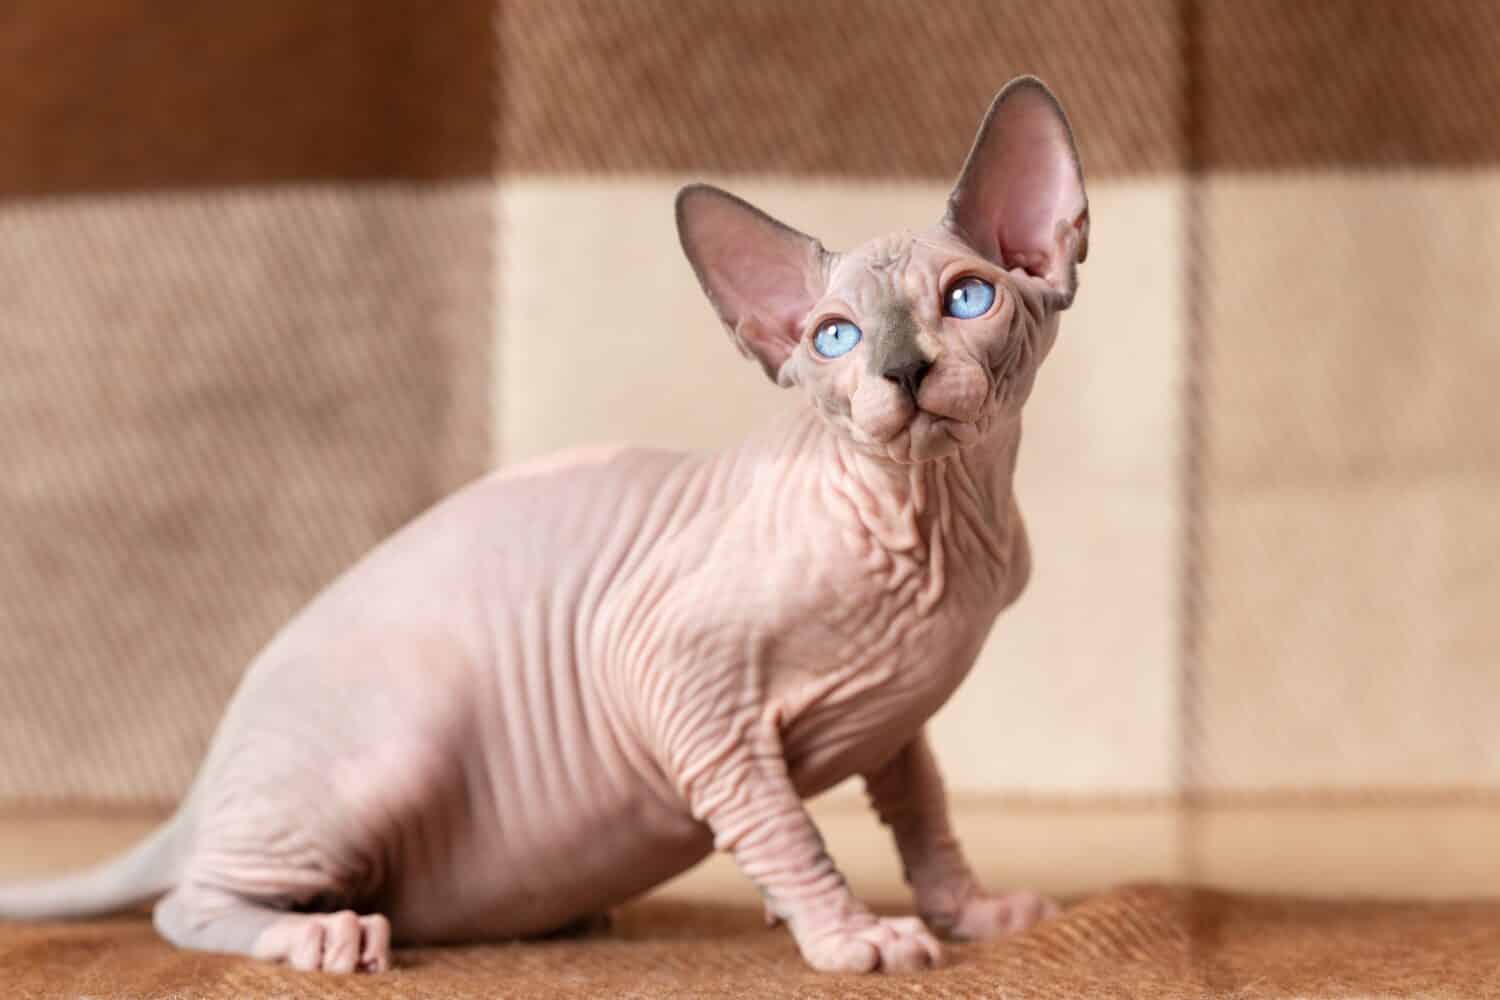 Blue mink and white color Sphynx cat four months old with blue eyes sitting at wool plaid brown and beige blanket and looking away carefully. Beautiful hairless male cat is rare breed pet. Home shot.